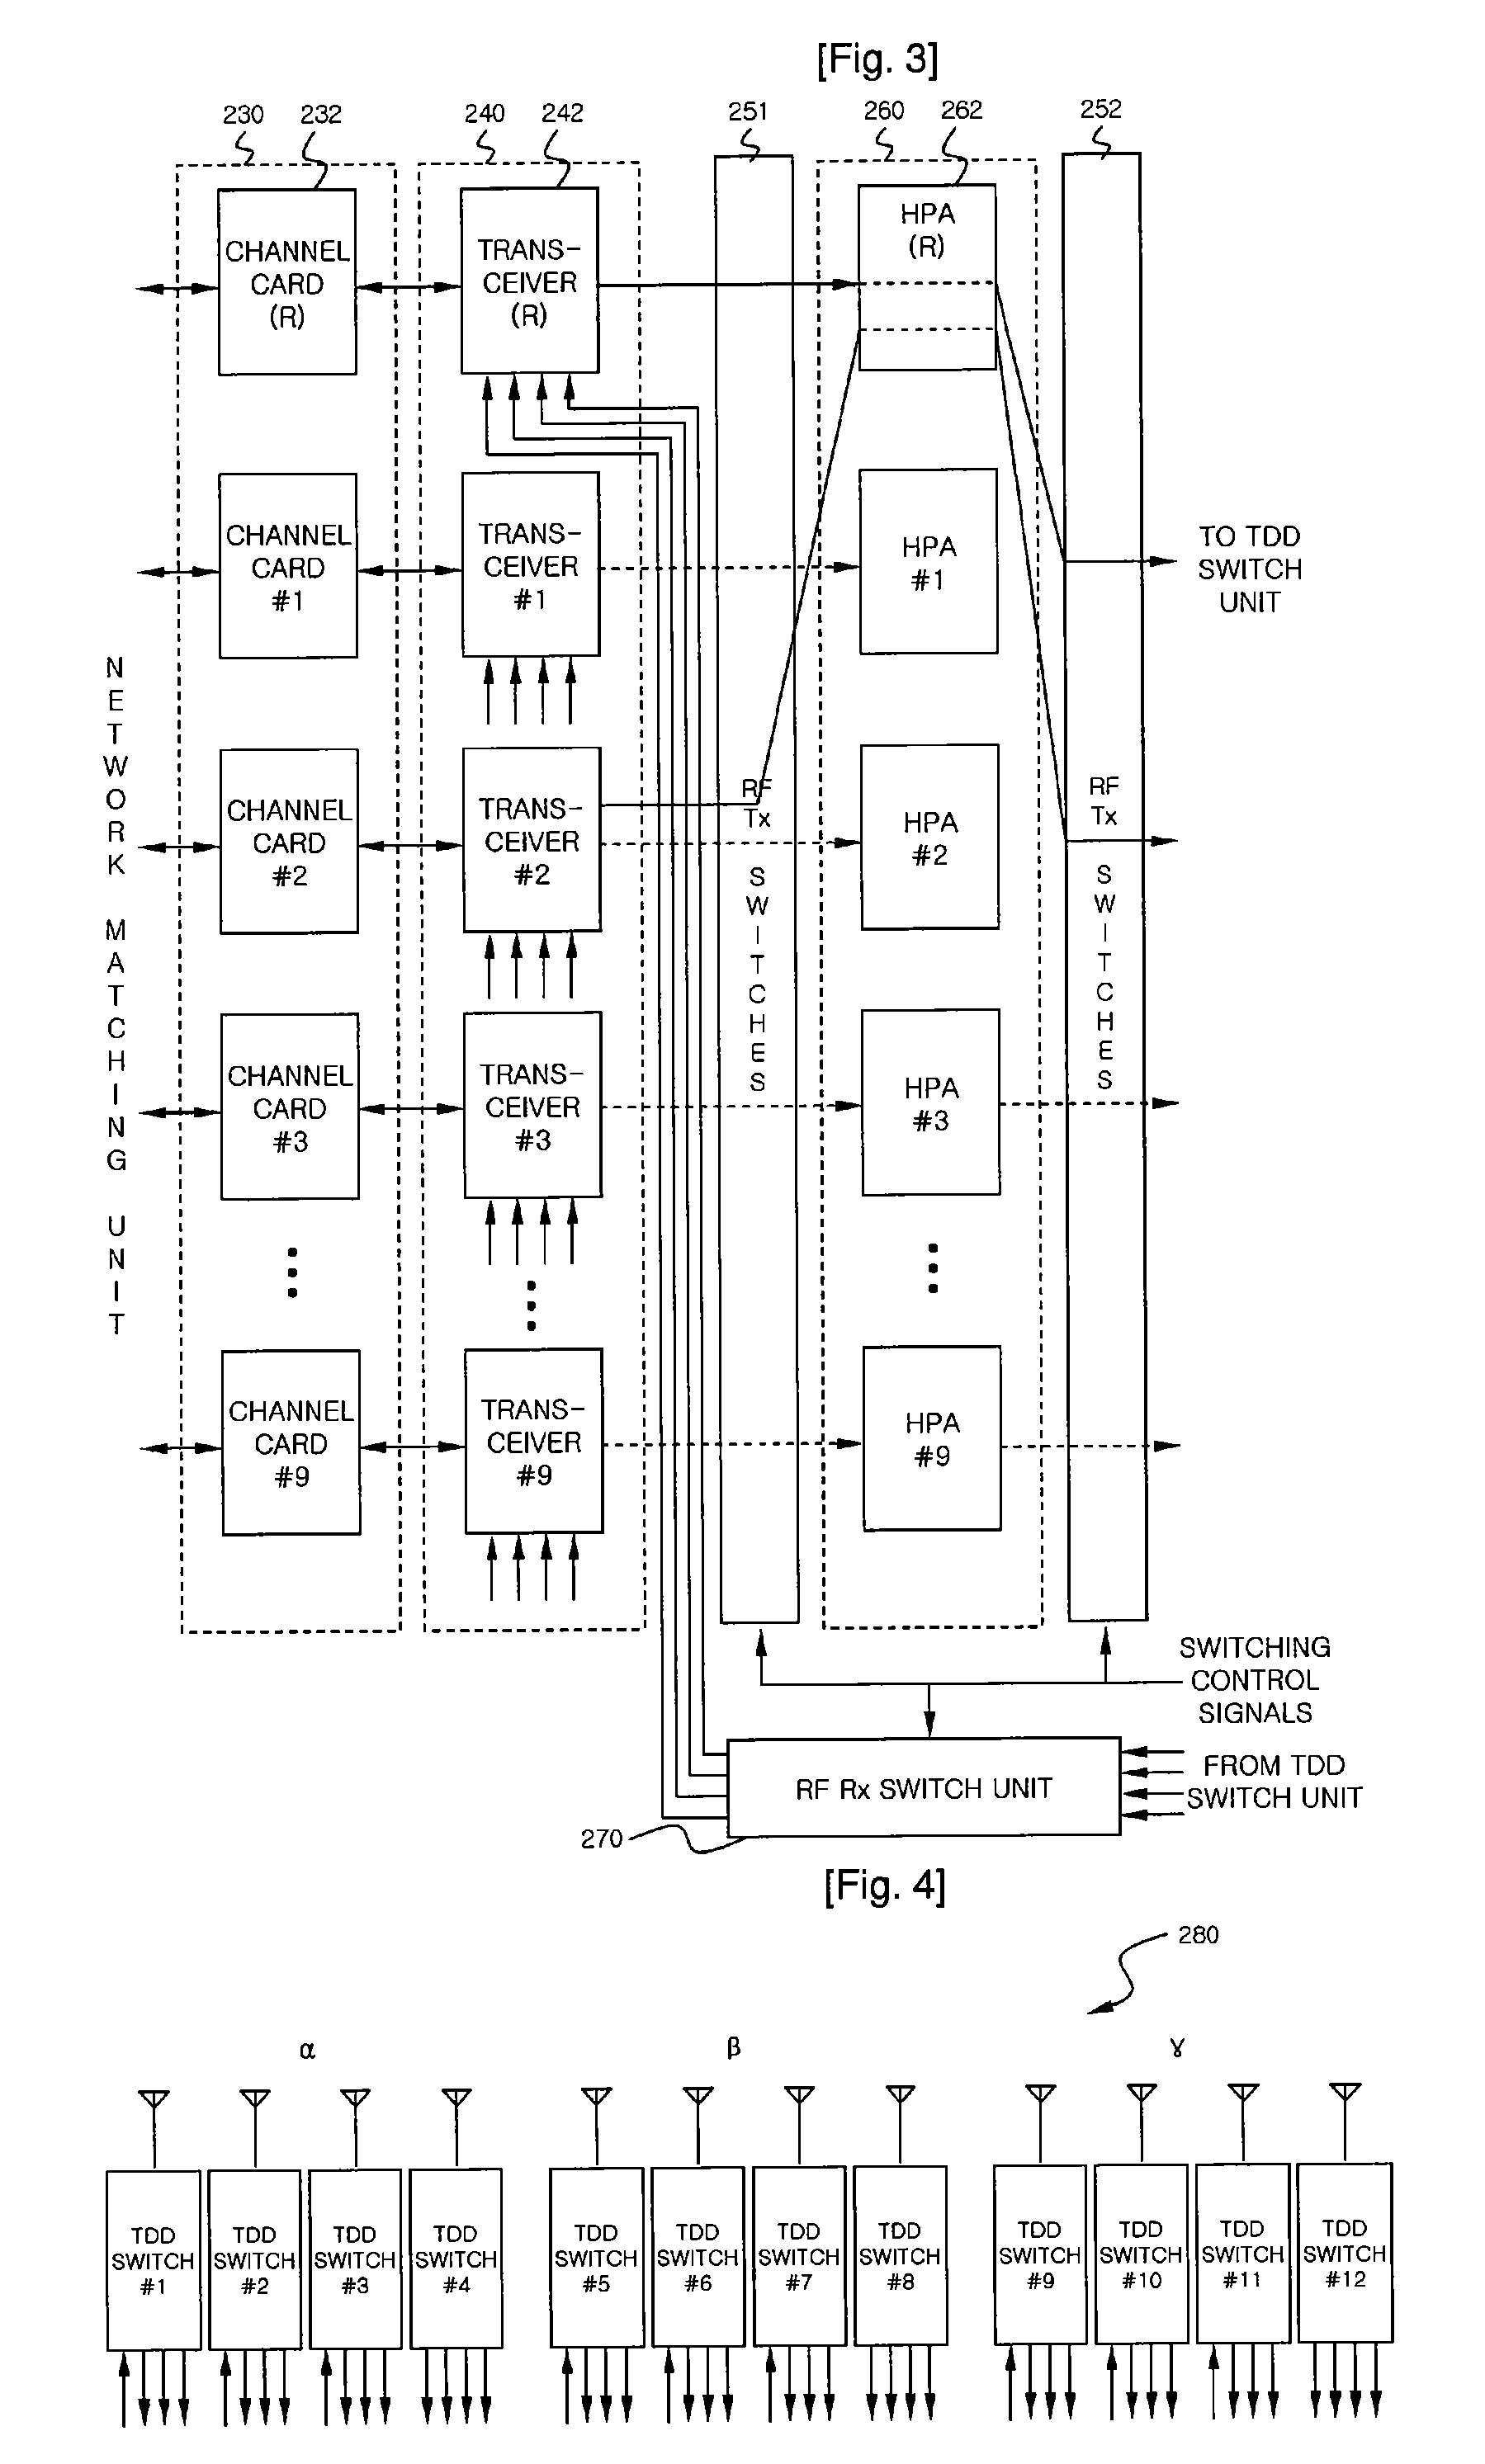 Apparatus and method for implementing efficient redundancy and widened service coverage in radio access station system